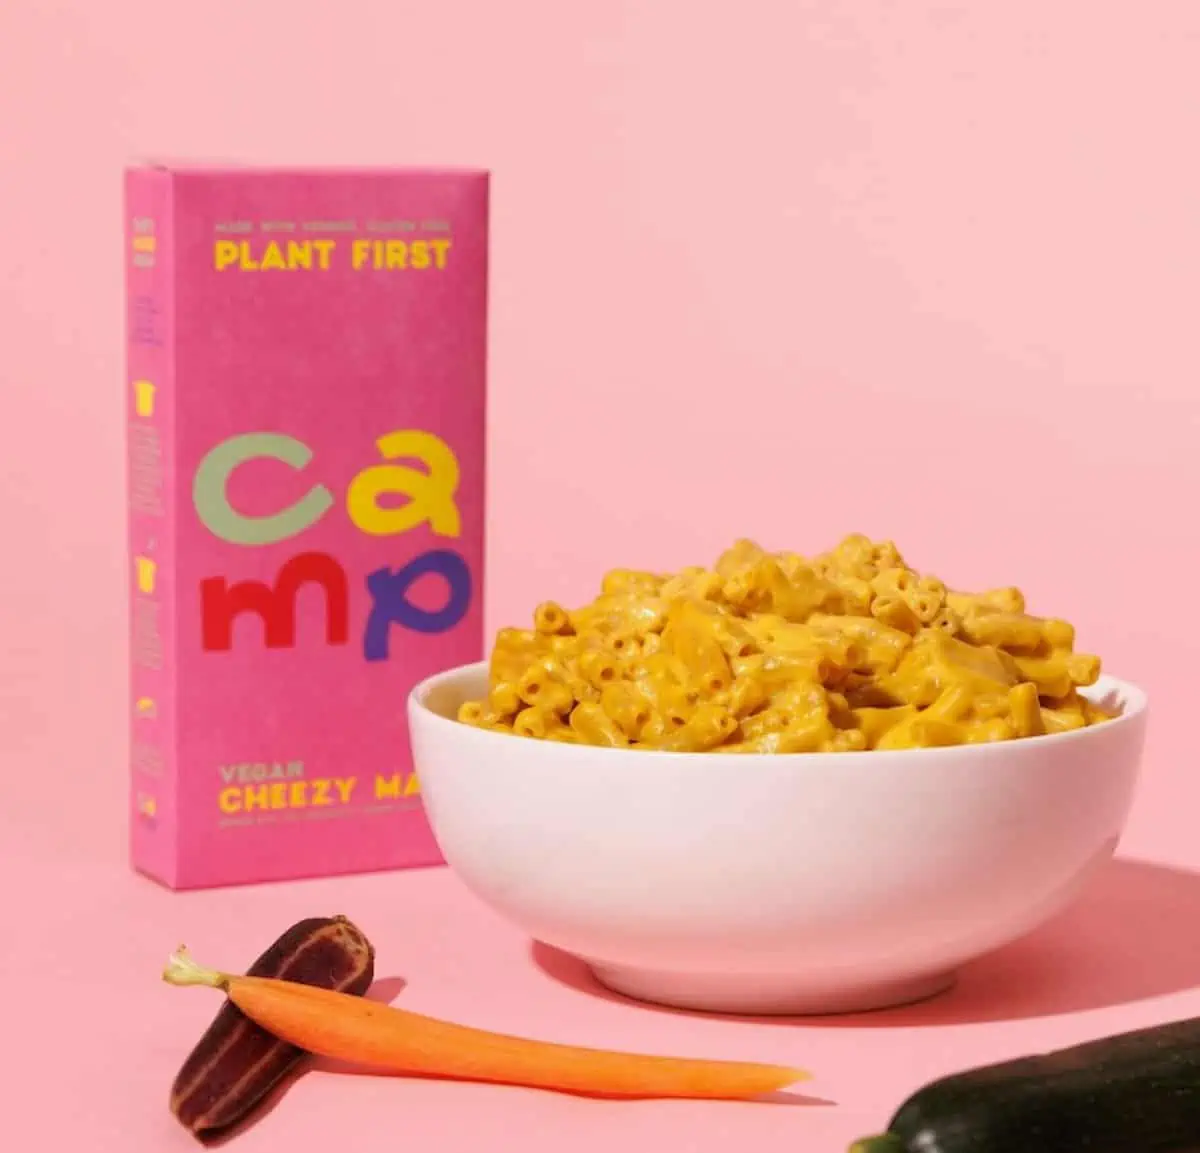 A bowl full of Camp's vegan cheezy mac and cheese next to the box.